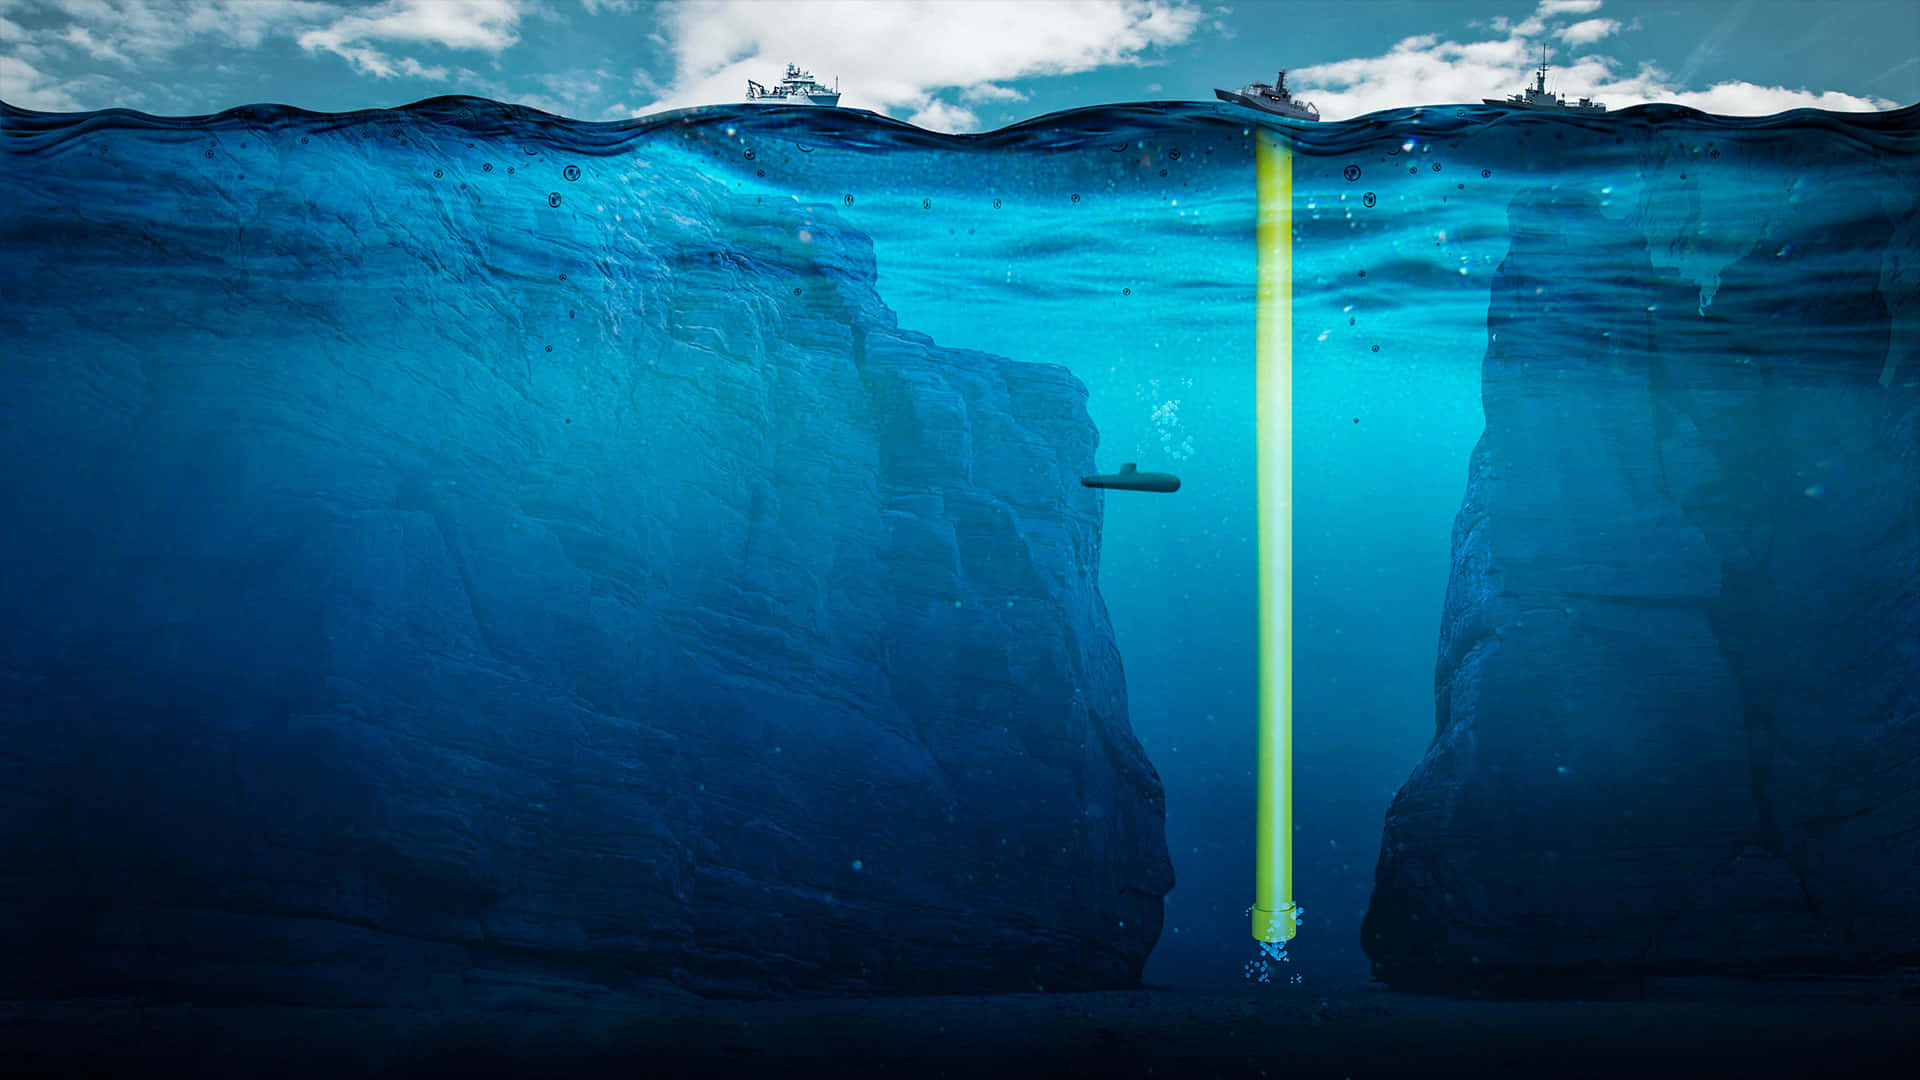 A magnificent view of the deepest point in the ocean - the Mariana Trench